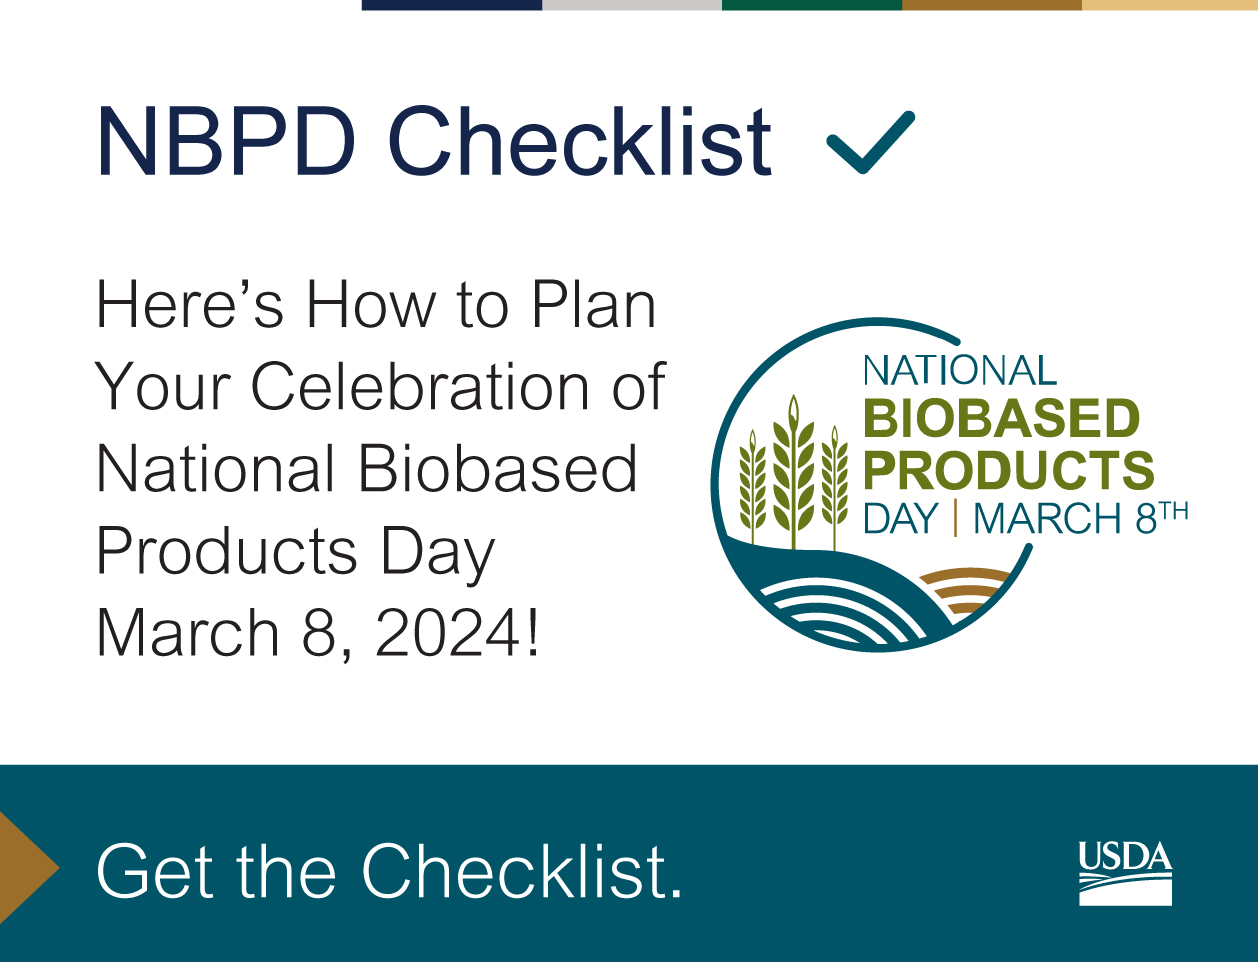 National Biobased Products Date